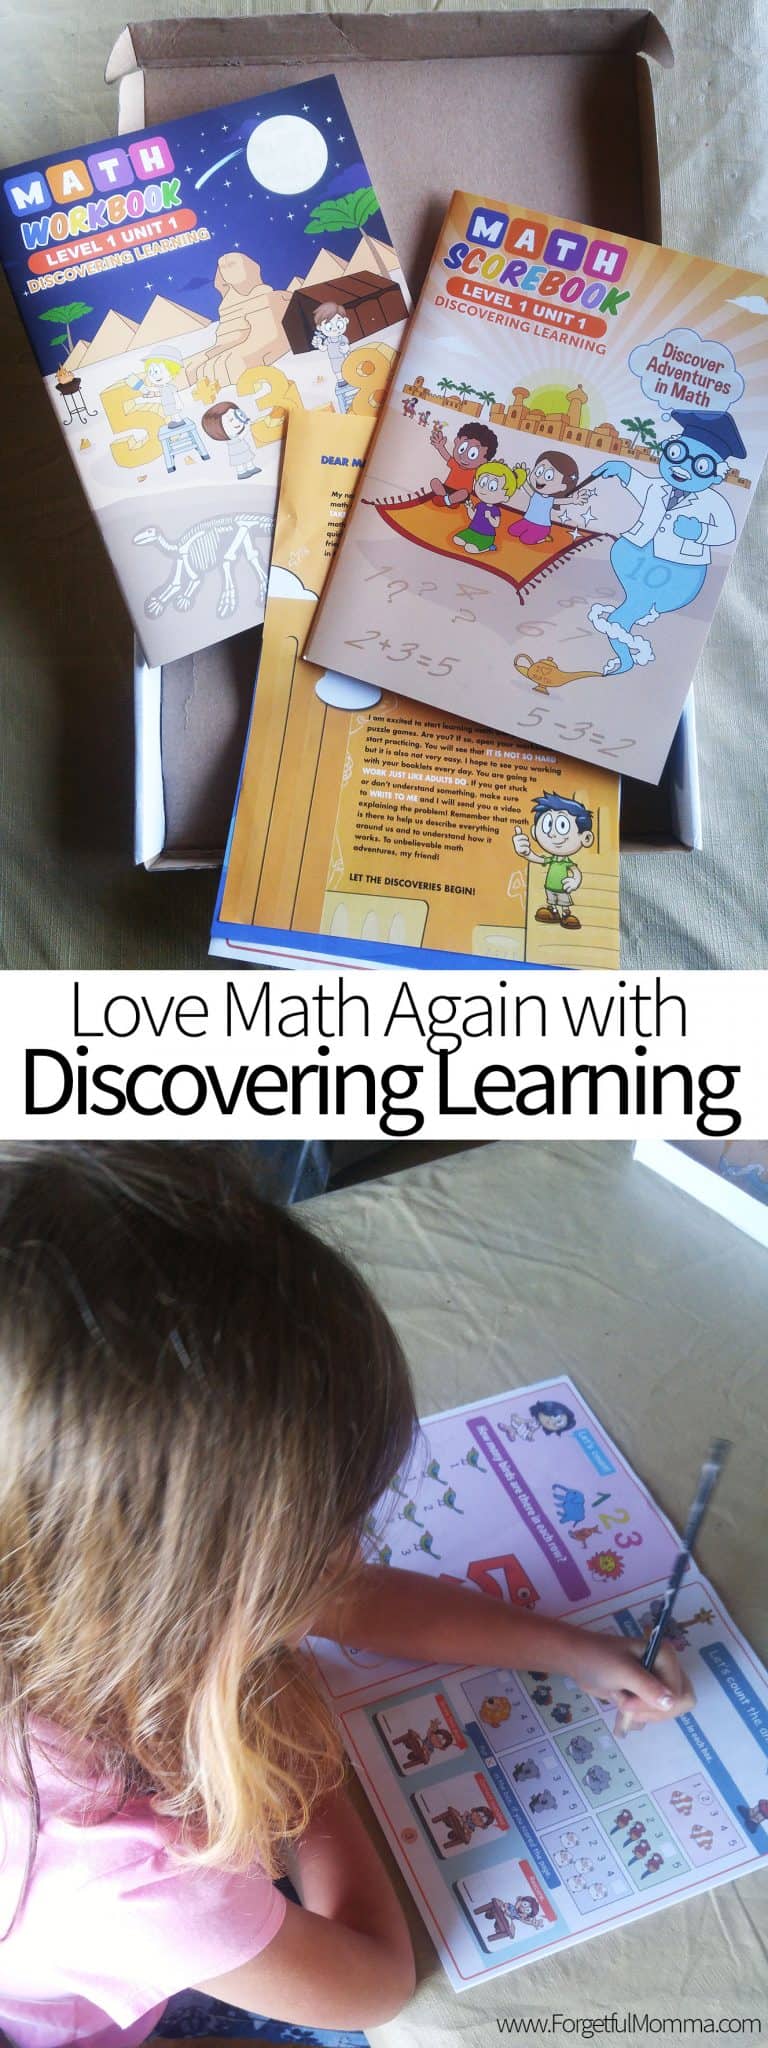 Love Math Again with Discovering Learning